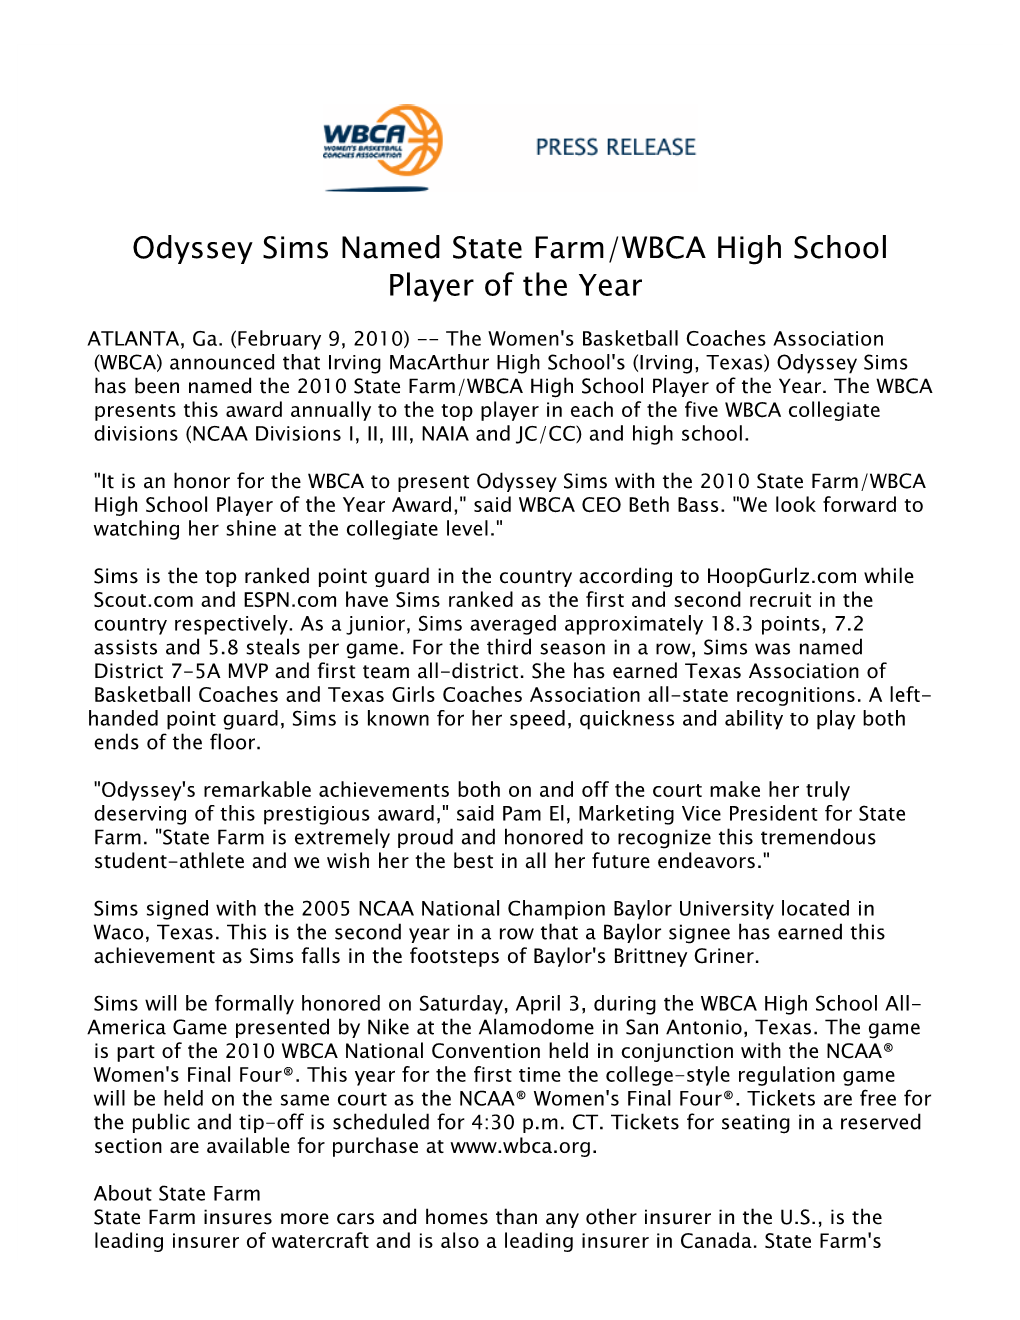 Odyssey Sims Named State Farm/WBCA High School Player of the Year